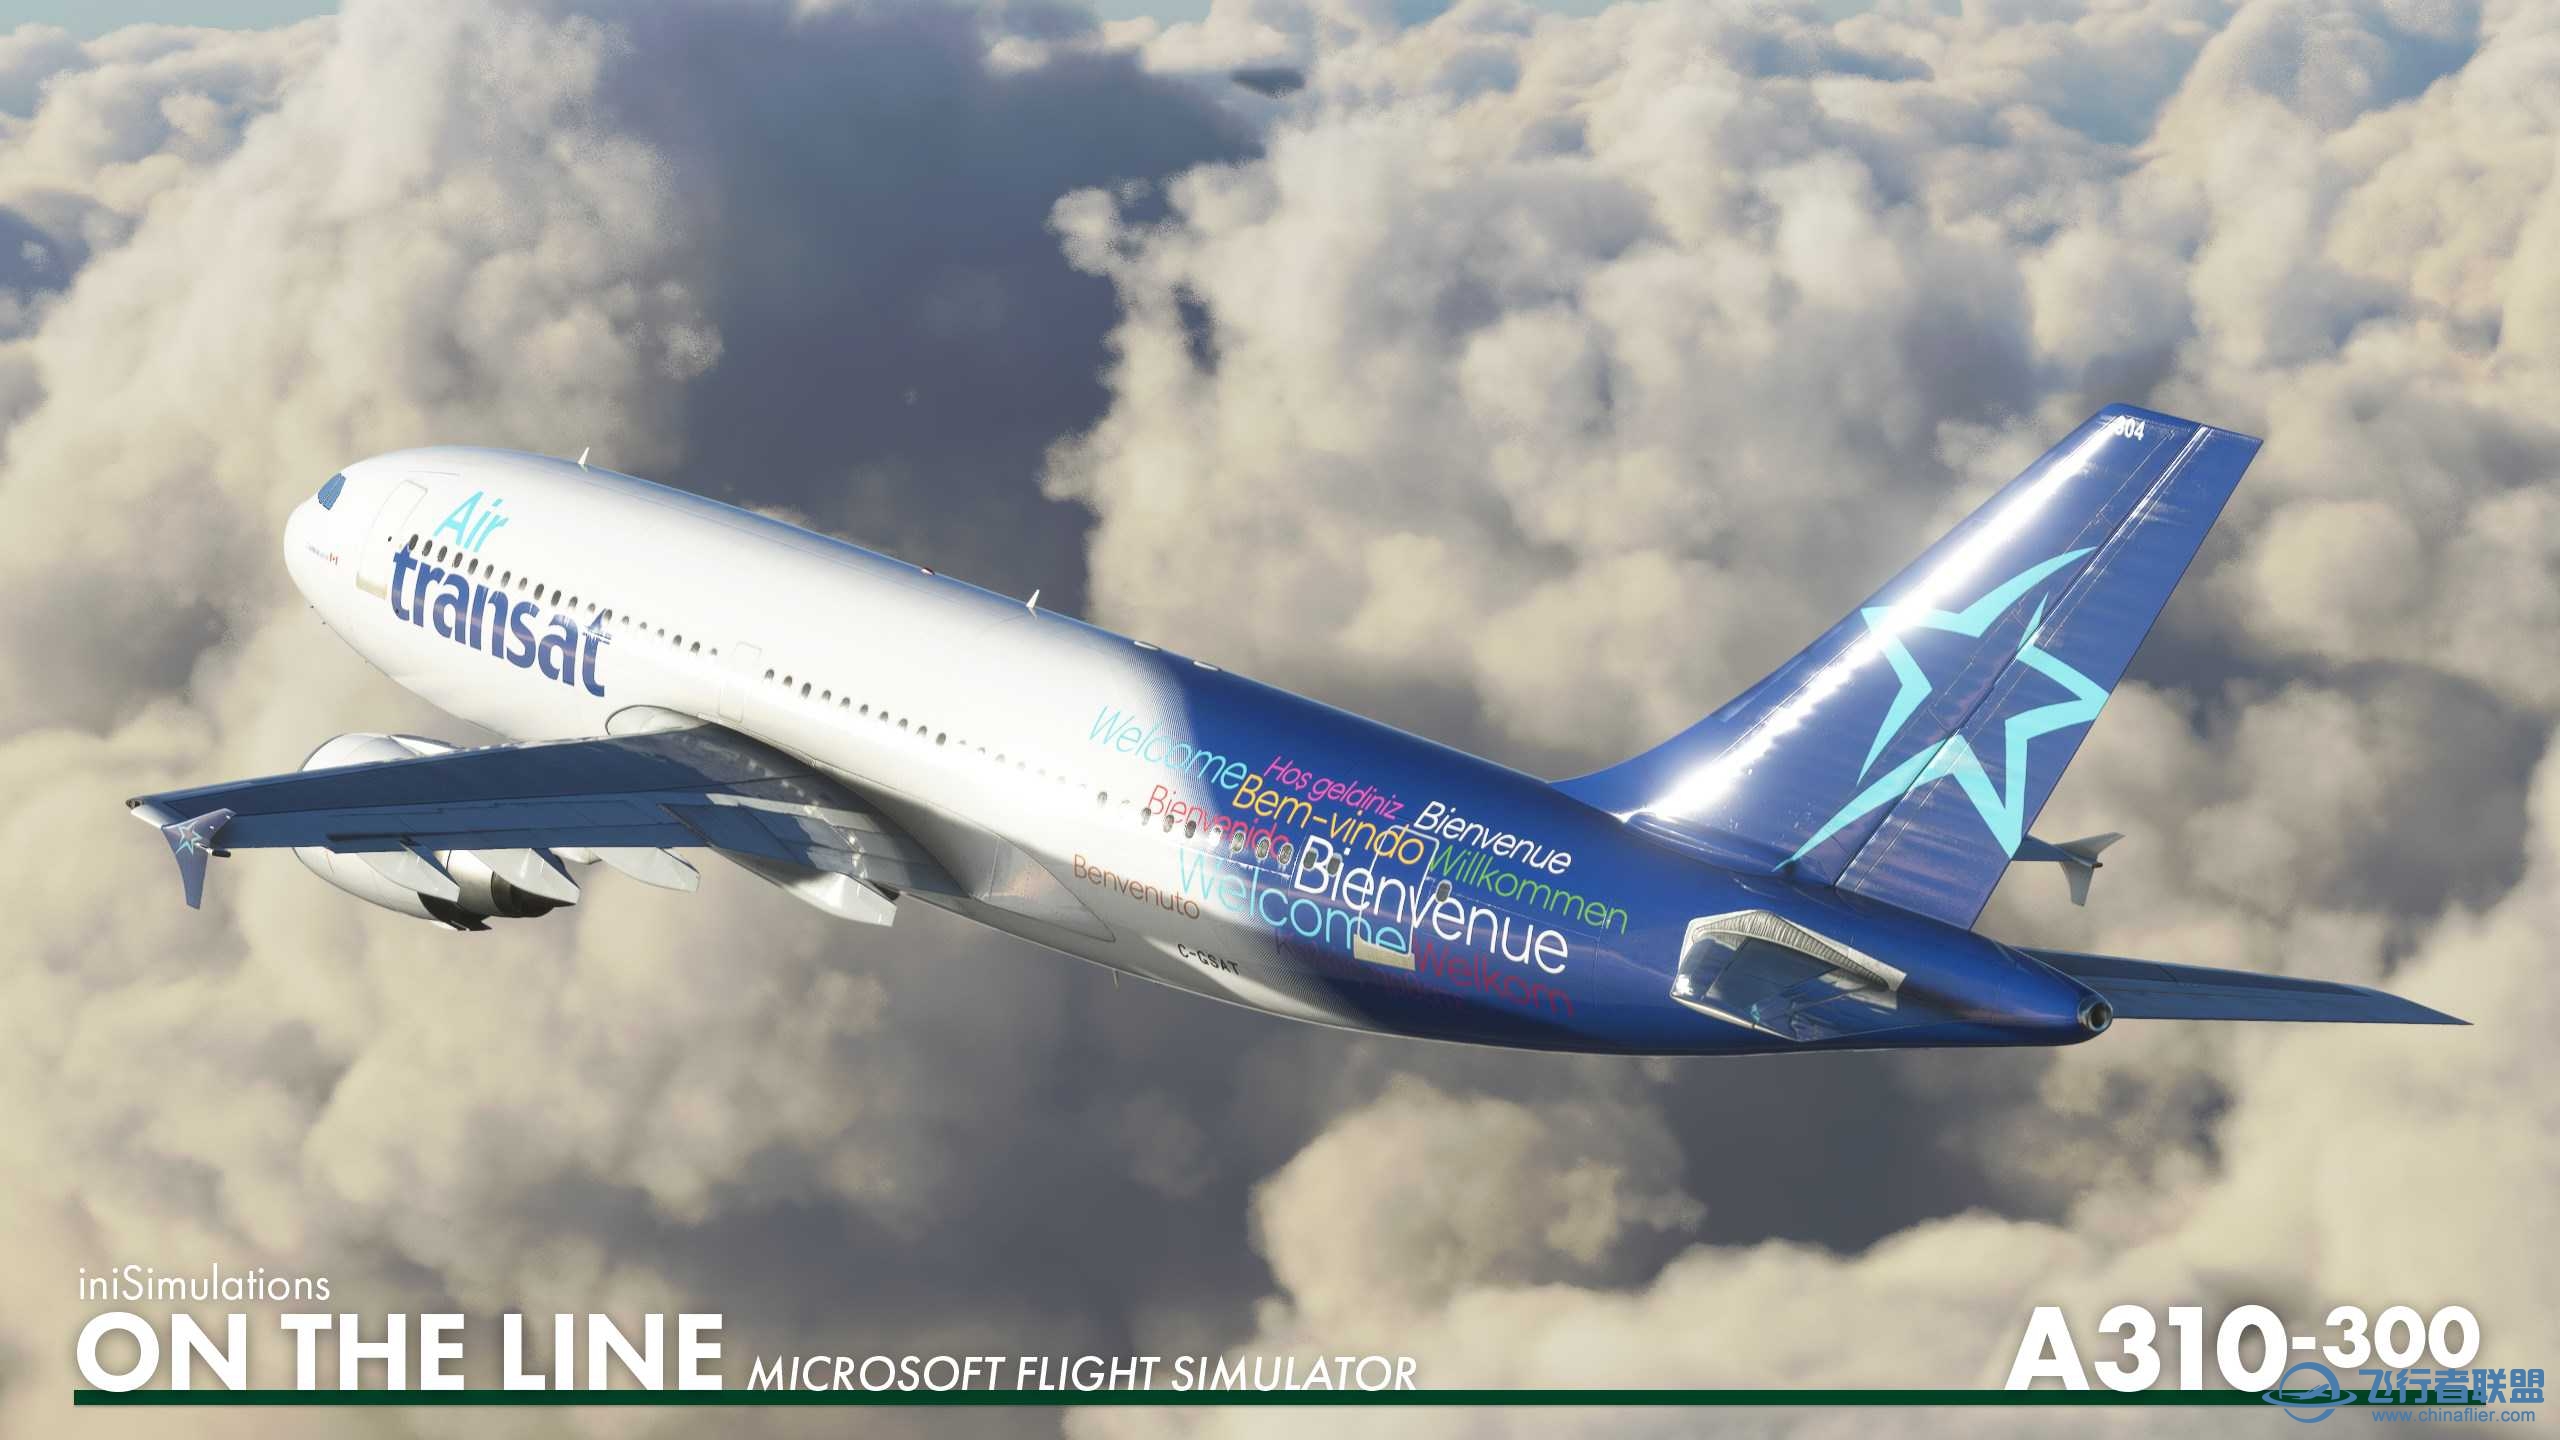 iniSimulations A310-300 will be coming to Microsoft Flight Simulator.-2936 